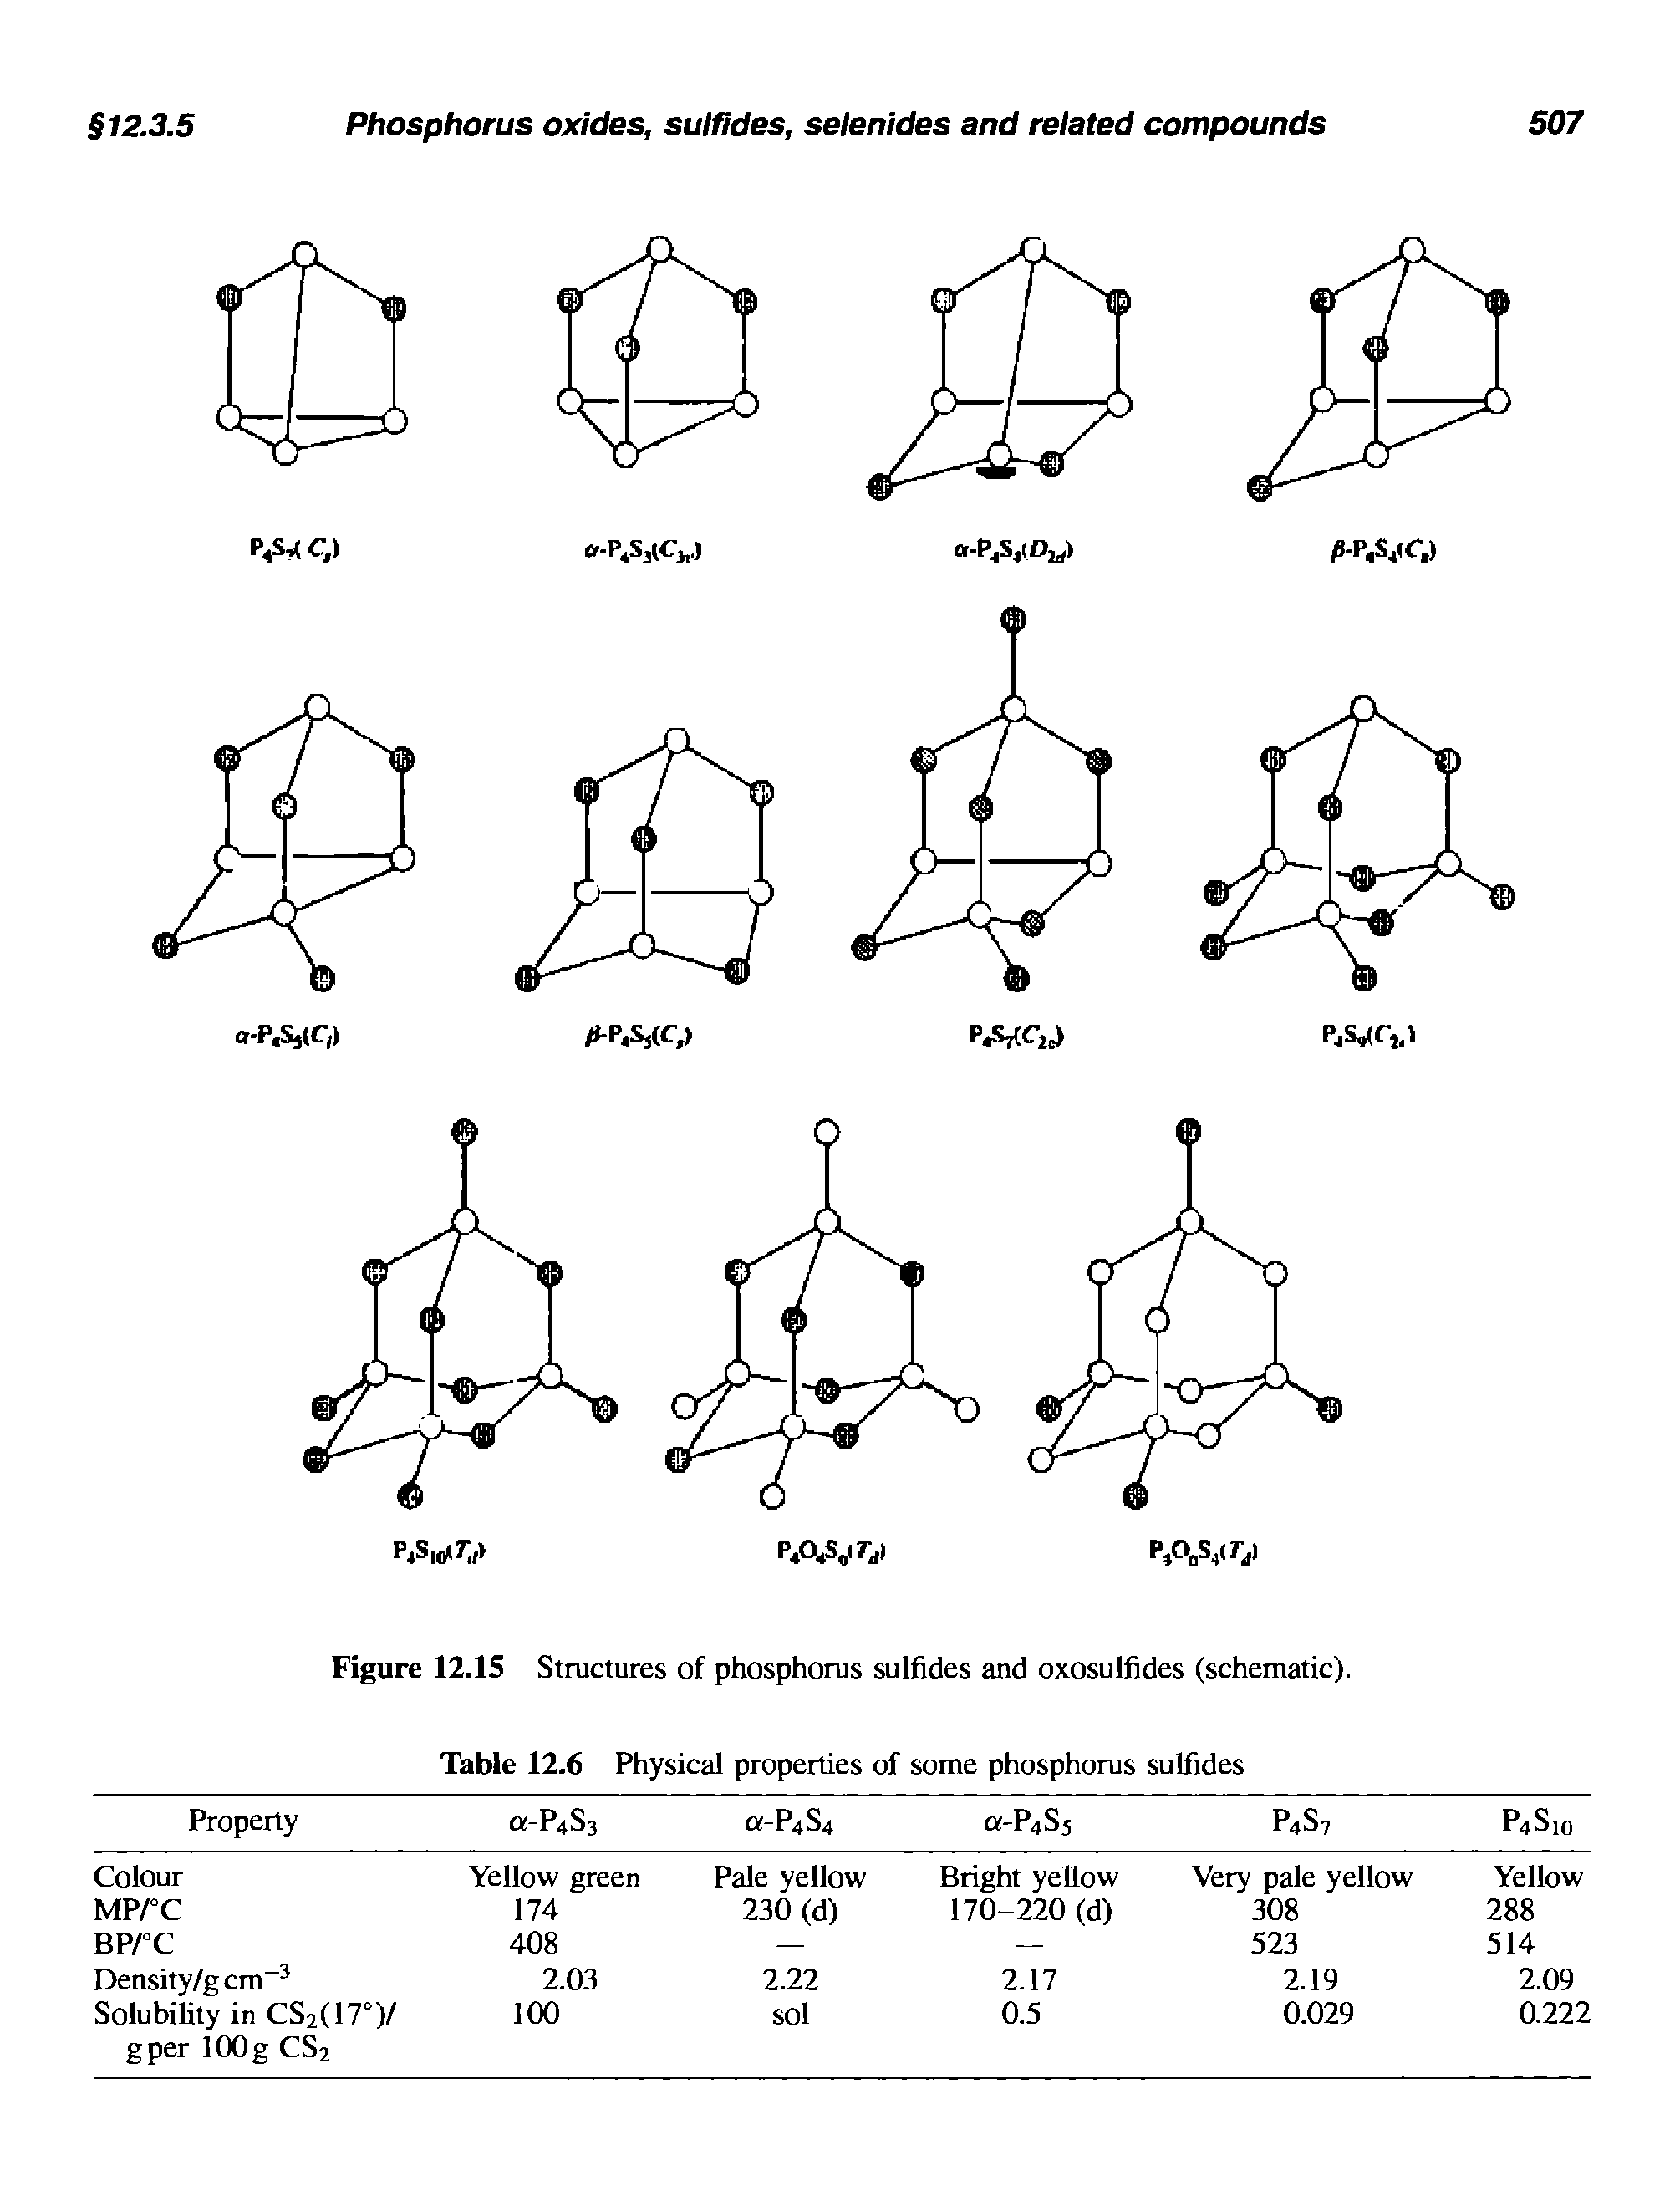 Figure 12.1S Structures of phosphorus sulfides and oxosulfides (schematic). Table 12.6 Physical properties of some phosphorus sulfides...